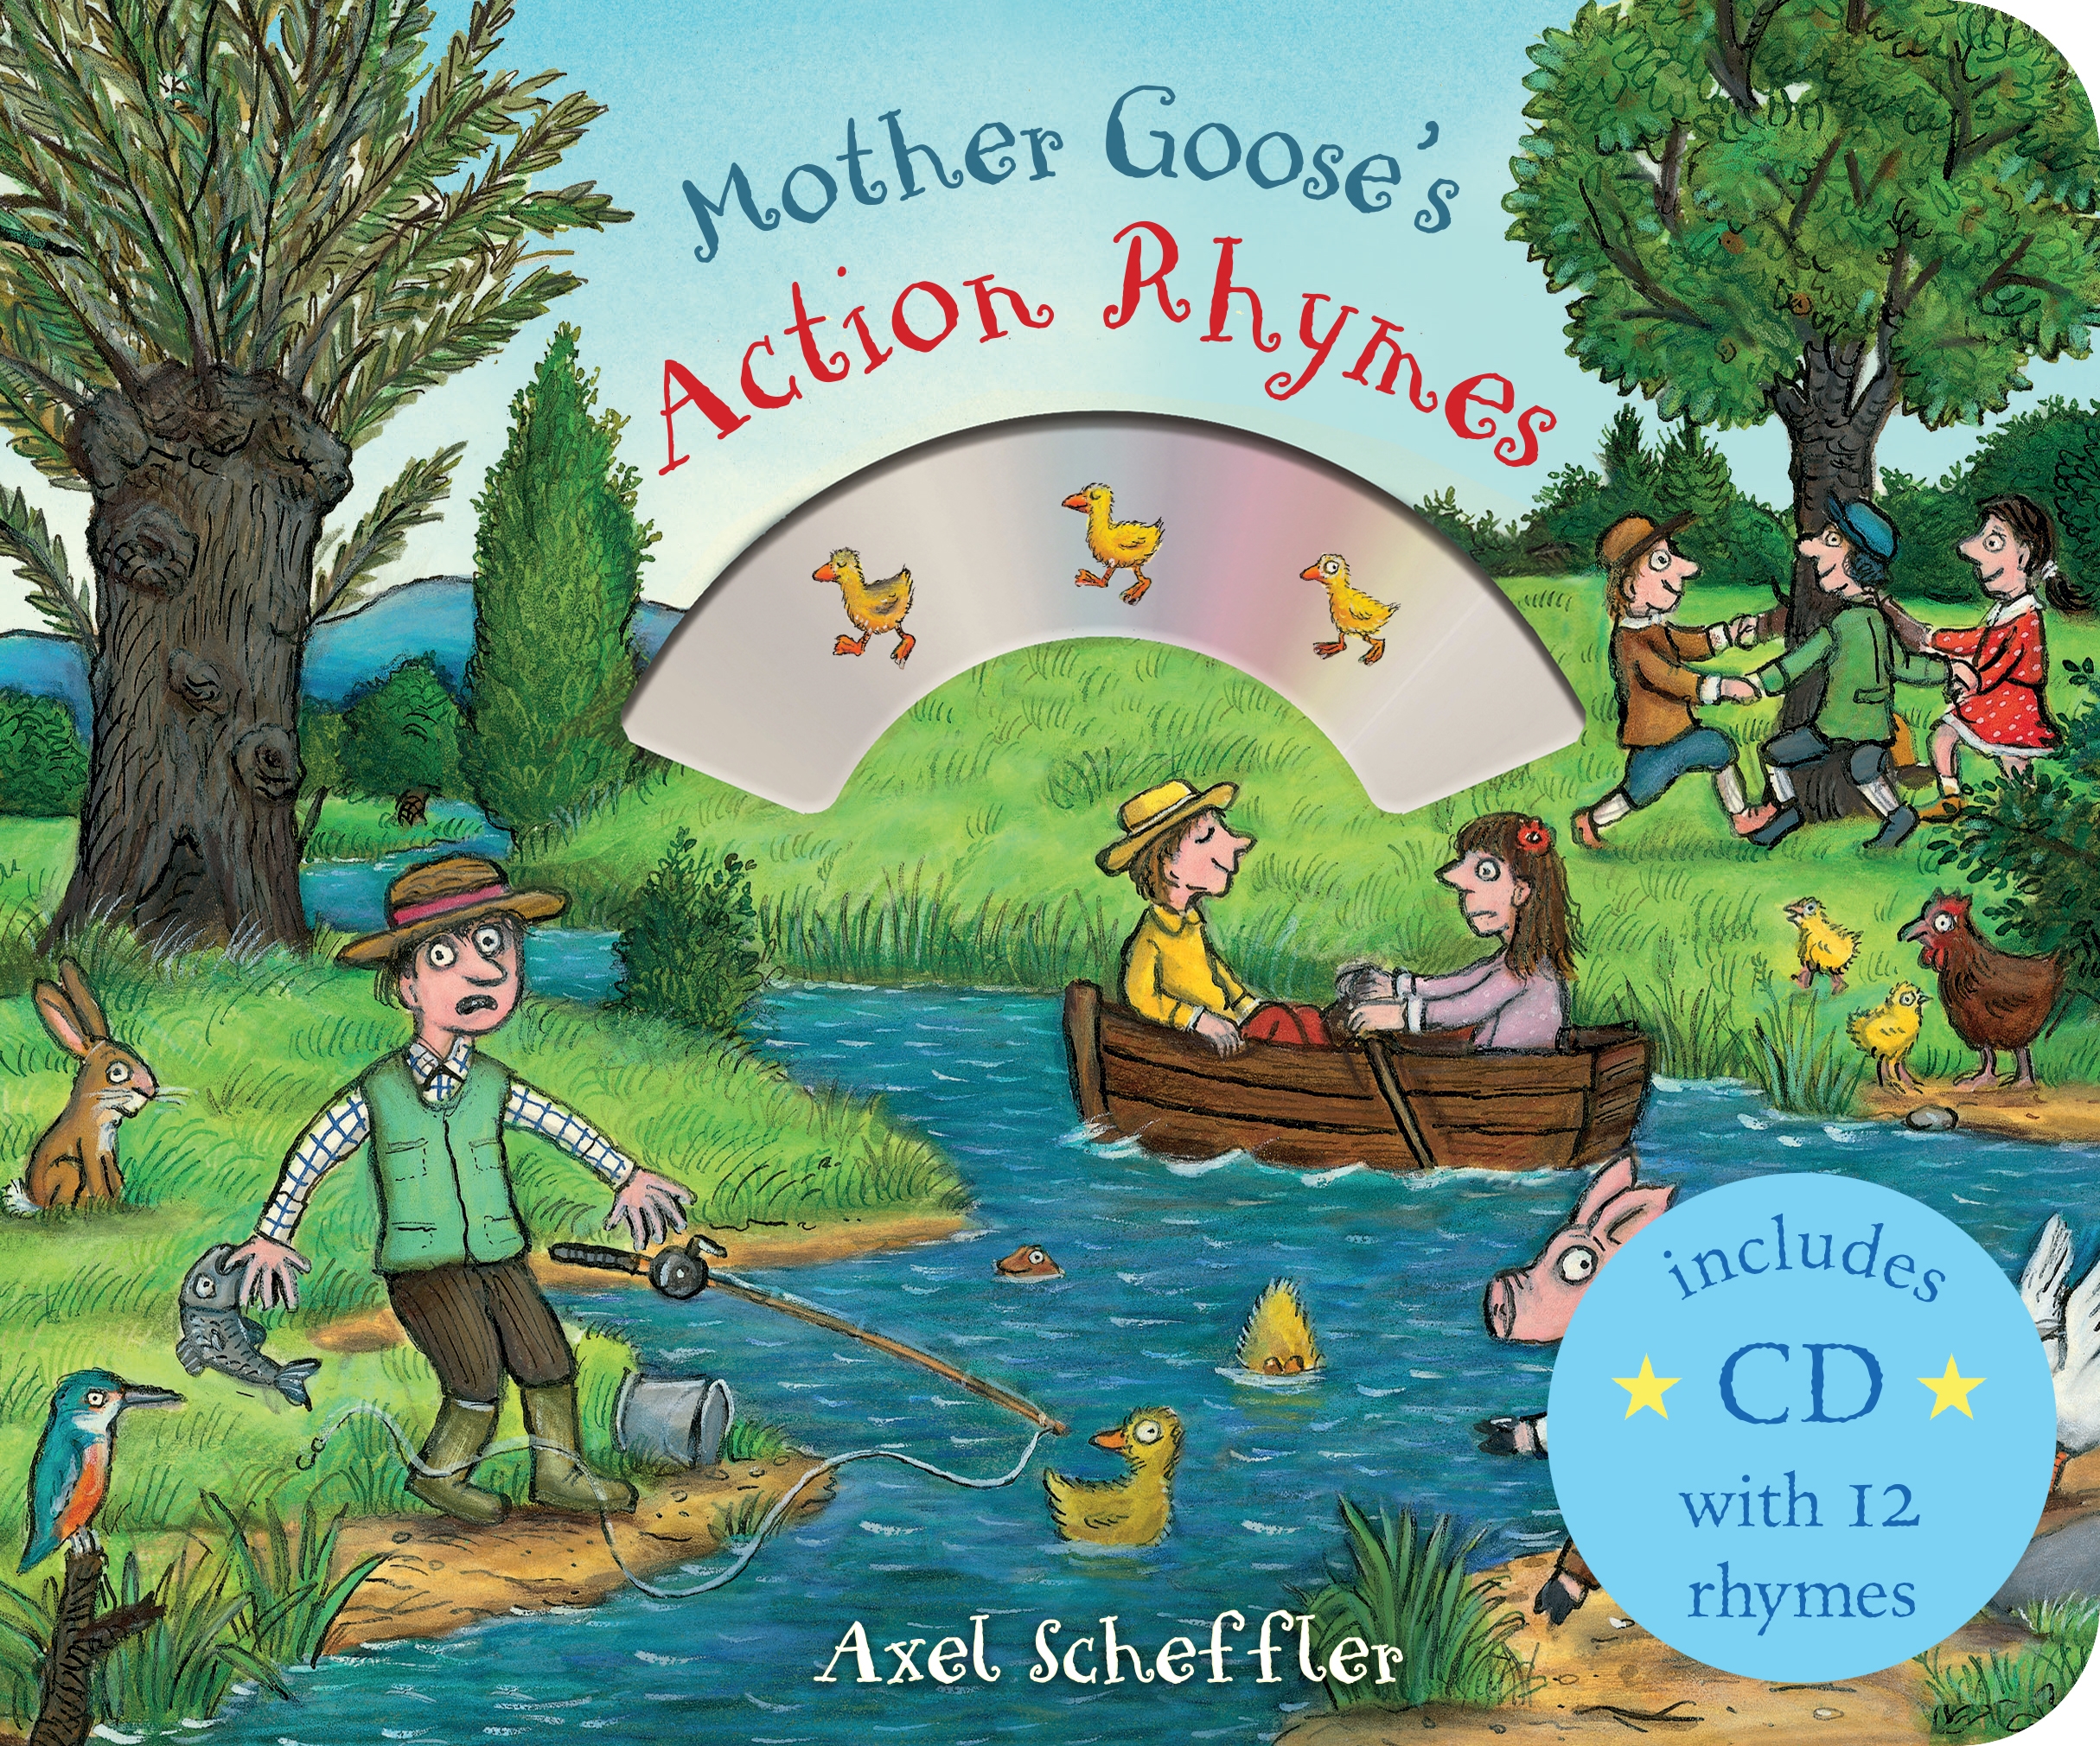 MOTHER GOOSE'S ACTION RHYMES